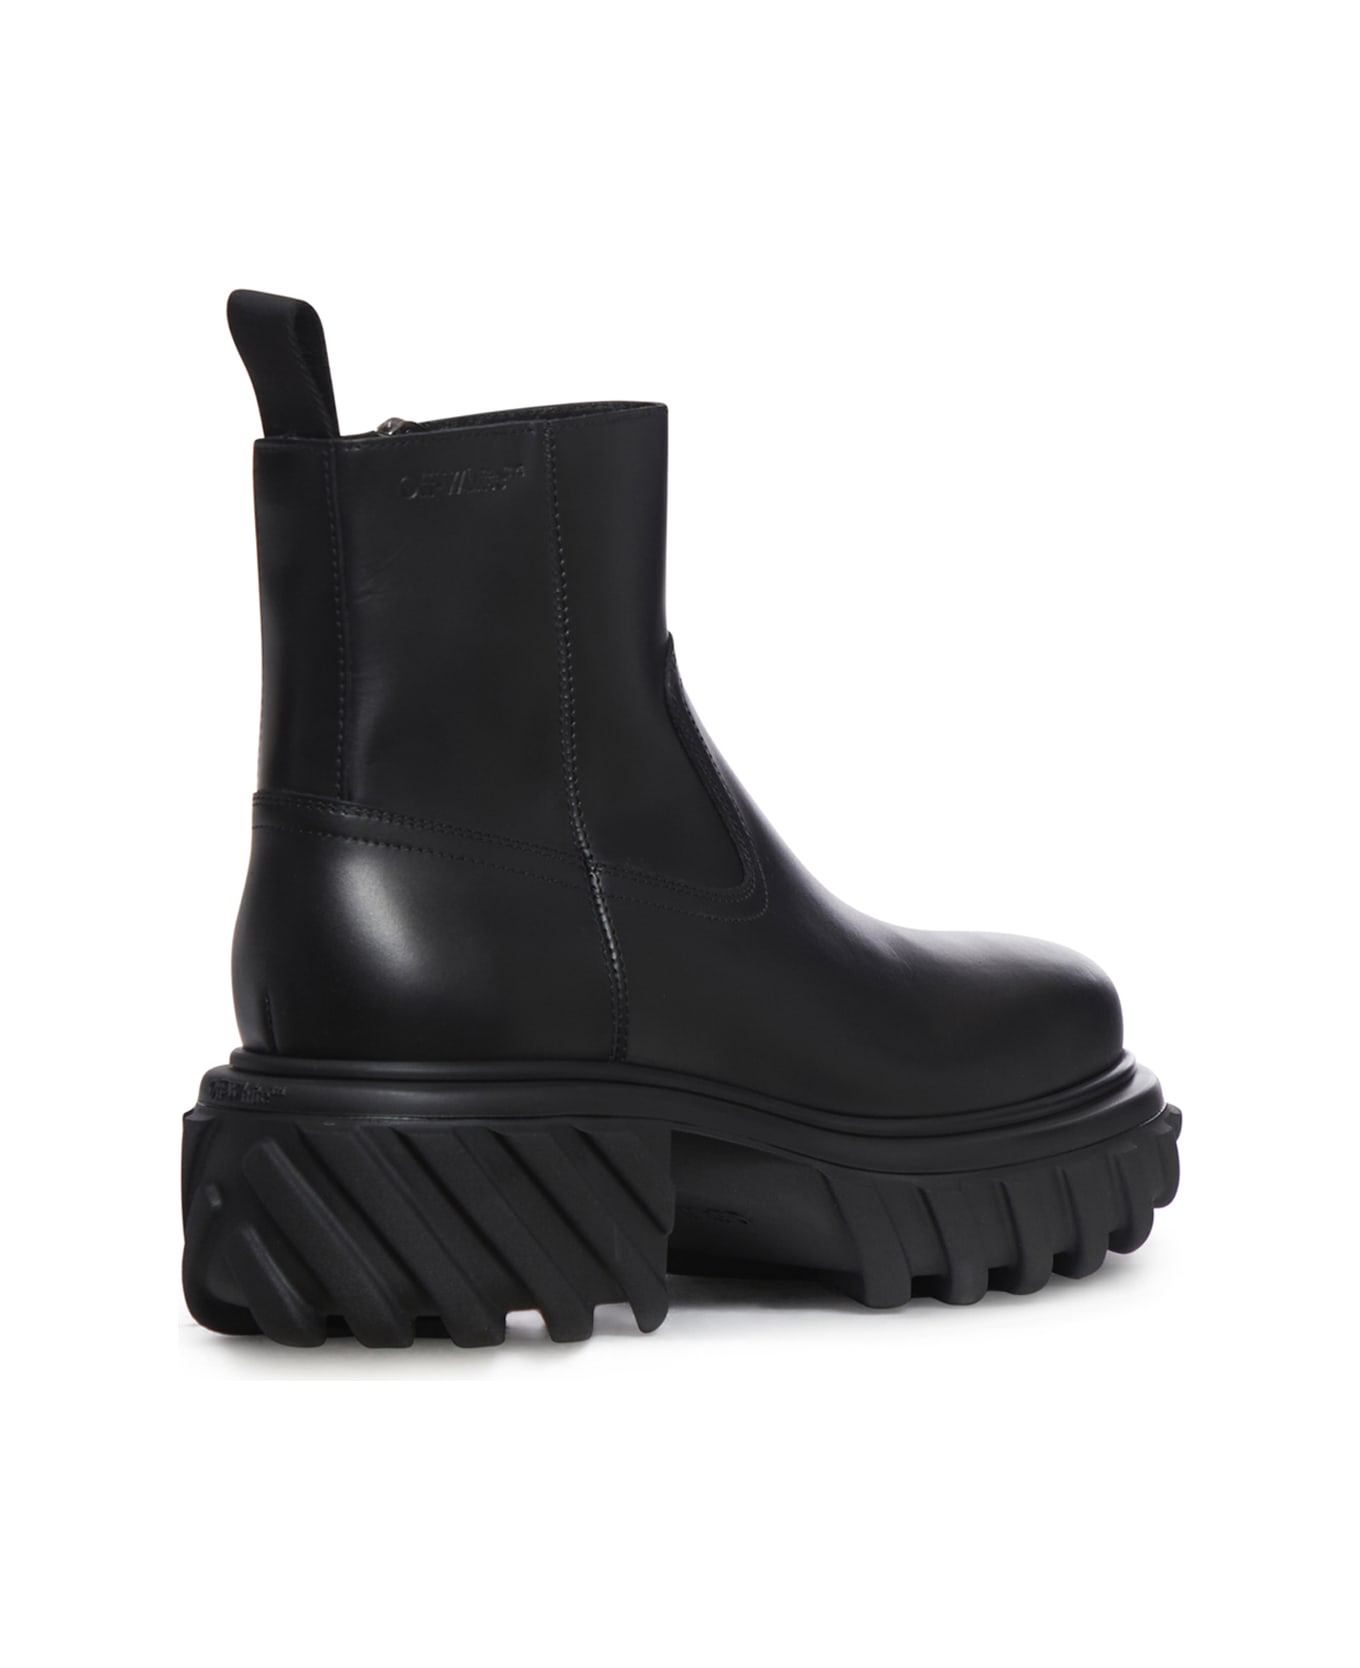 Off-White Exploration Motor Ankle Boot - Black